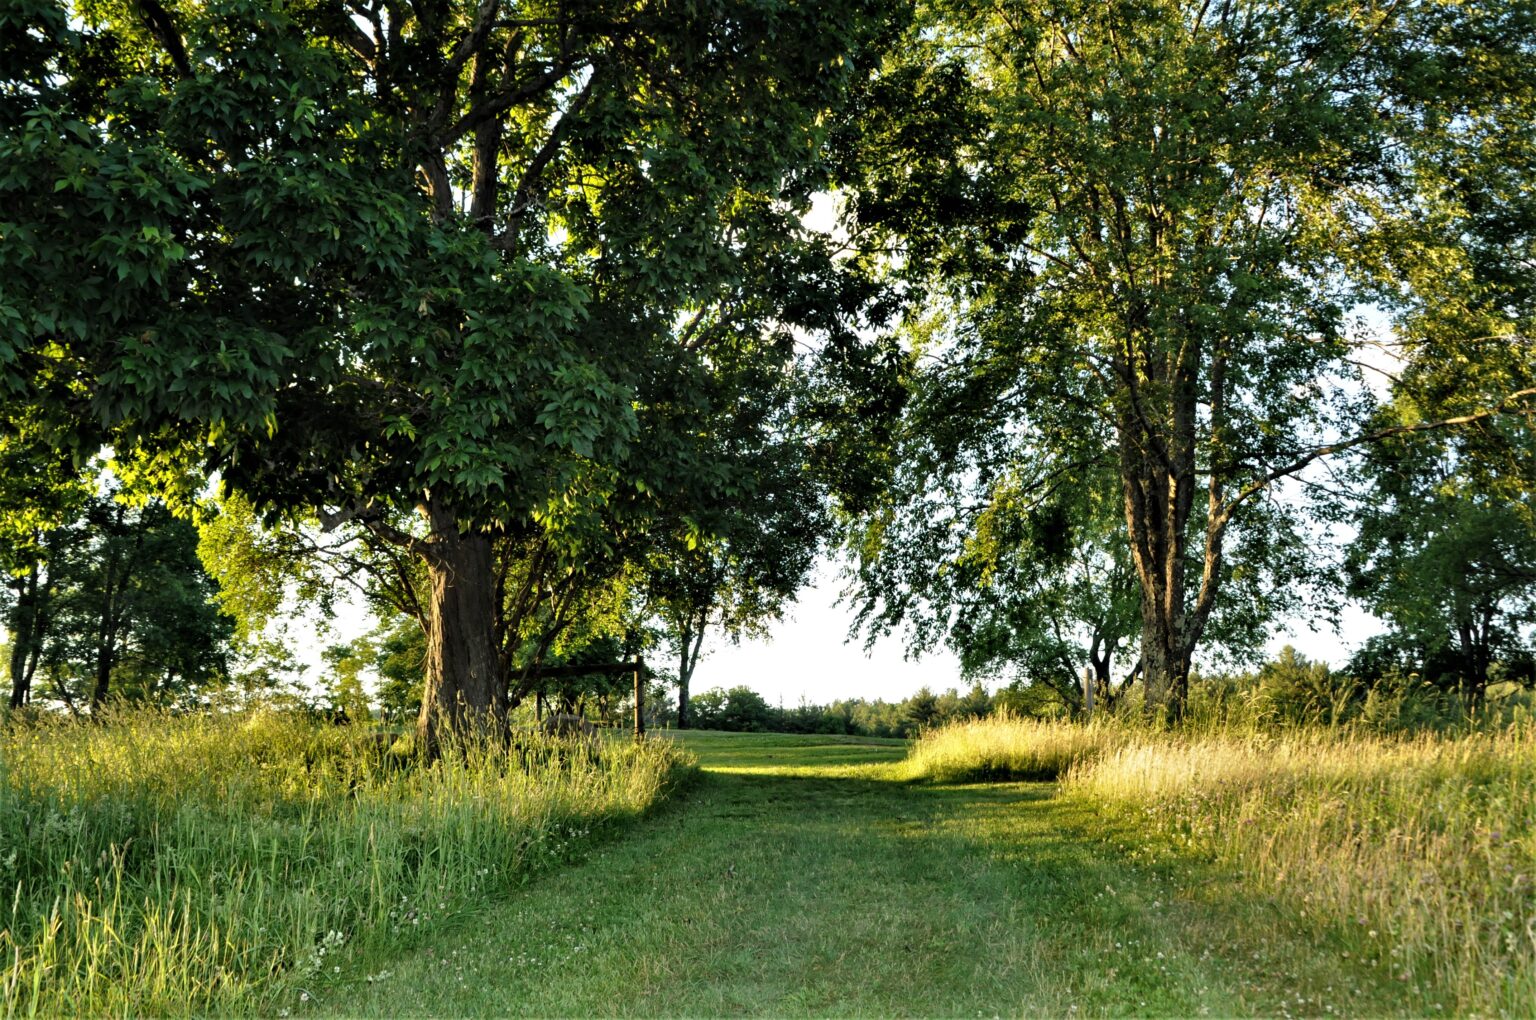 A lush, green pathway framed by tall grasses and mature trees leads into the distance. Sunlight filters through the dense canopy, creating dappled patterns on the grass. The trees are full of vibrant leaves, suggesting a warm and tranquil summer day. The inviting path curves gently, suggesting an idyllic and serene journey ahead.